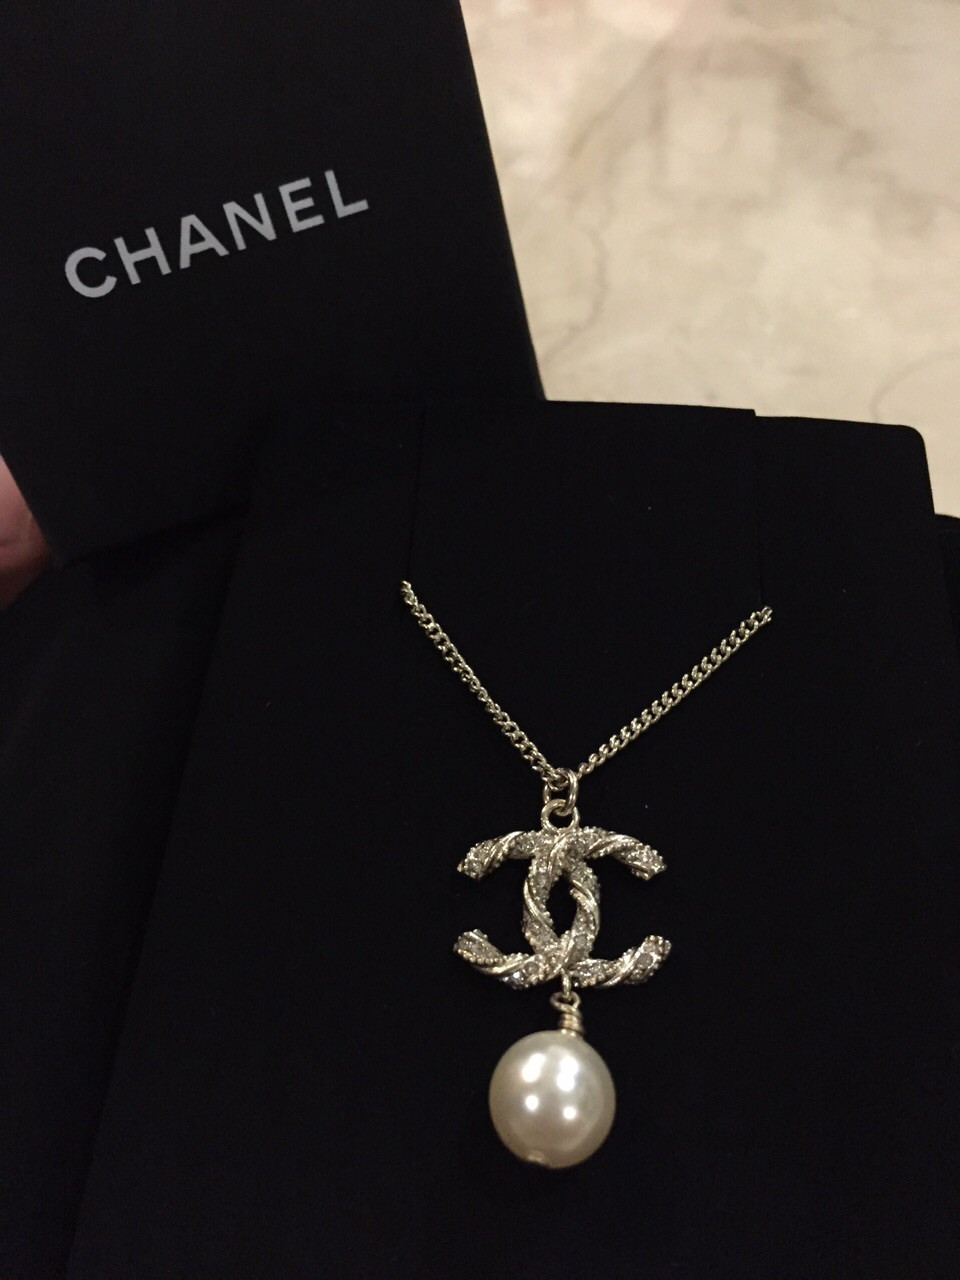 Chanel Necklace Price
 [SOLD] FOR SALE BNIB CHANEL CLASSIC NECKLACE WITH PEARL